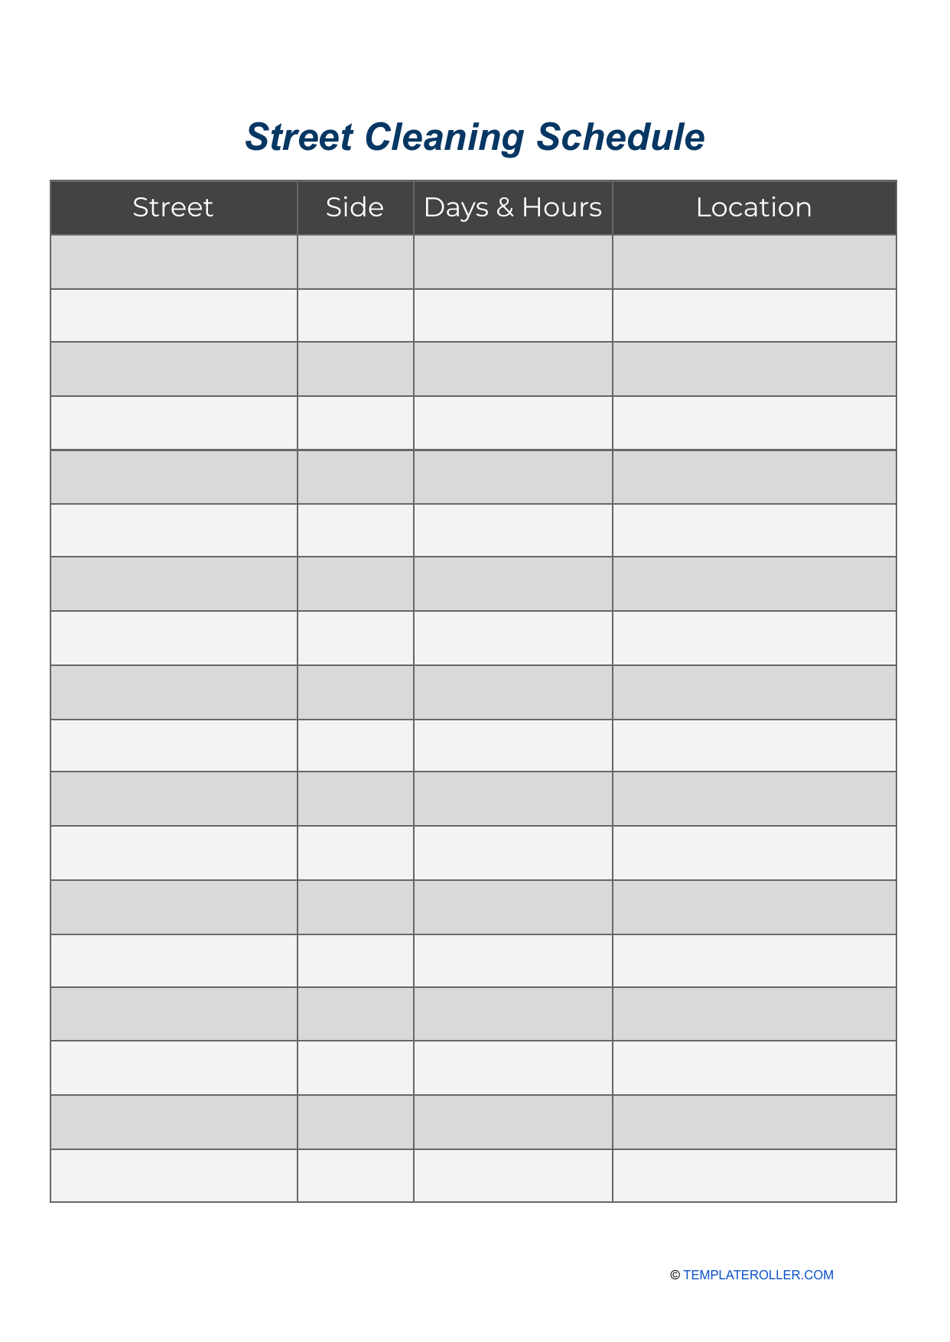 Street Cleaning Schedule Template - Preview Image